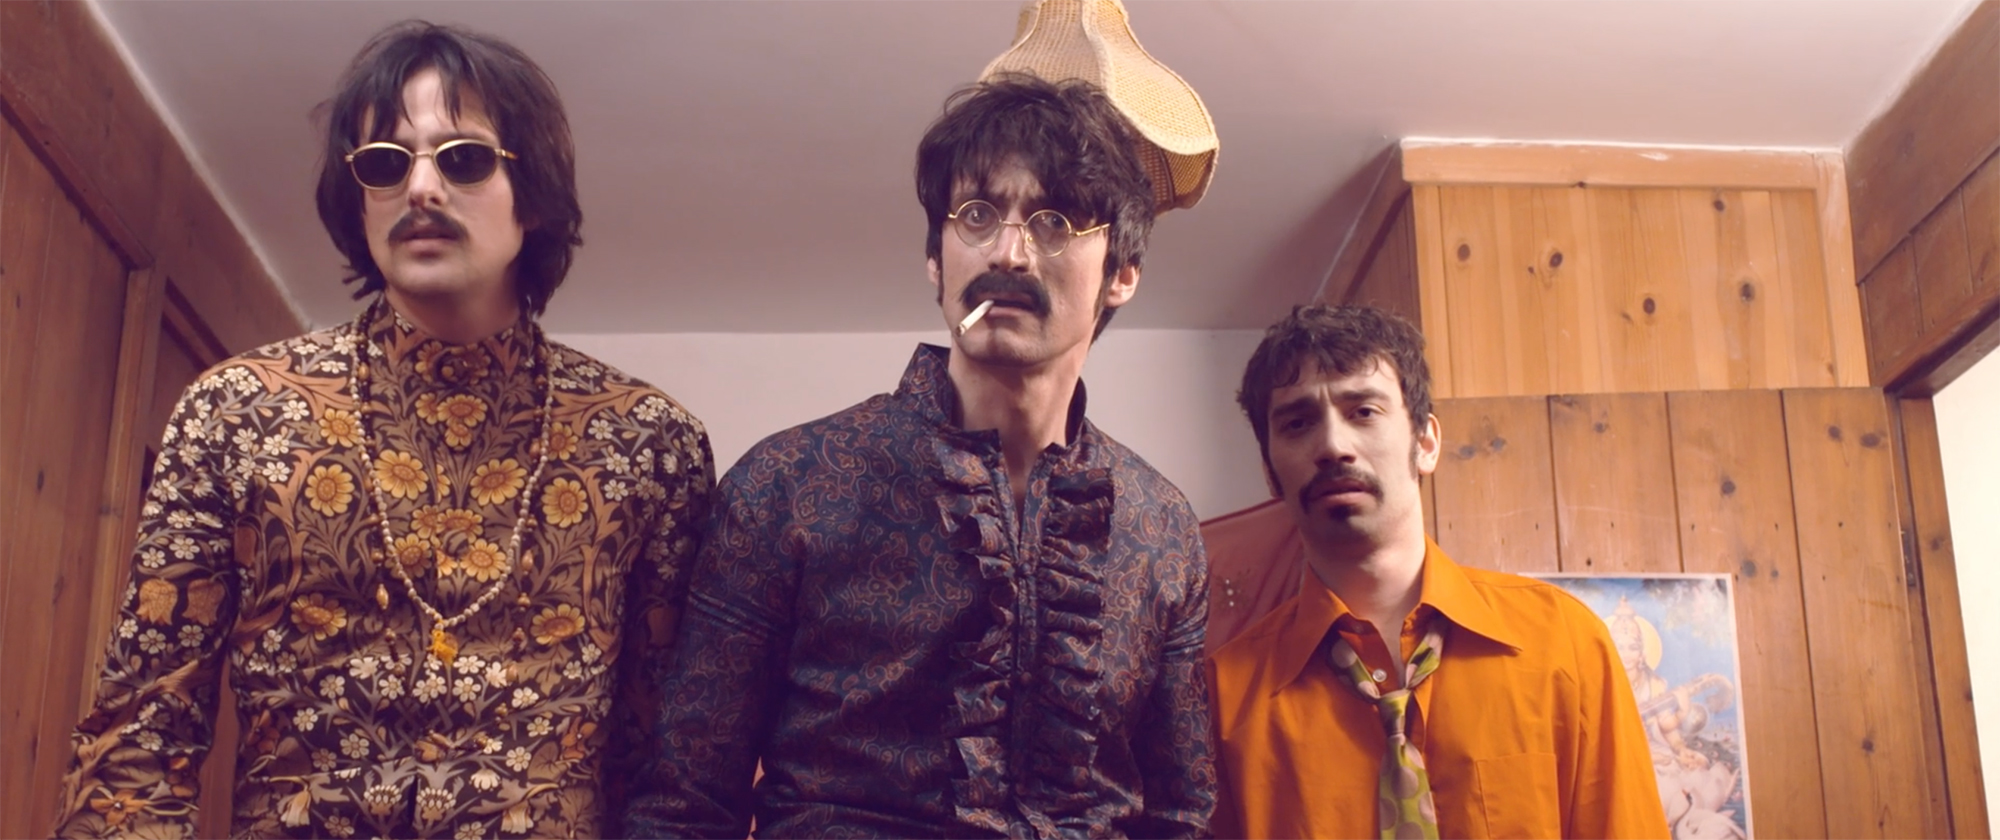 Three men resembling members of The Beatles look at the camera in a confused way.